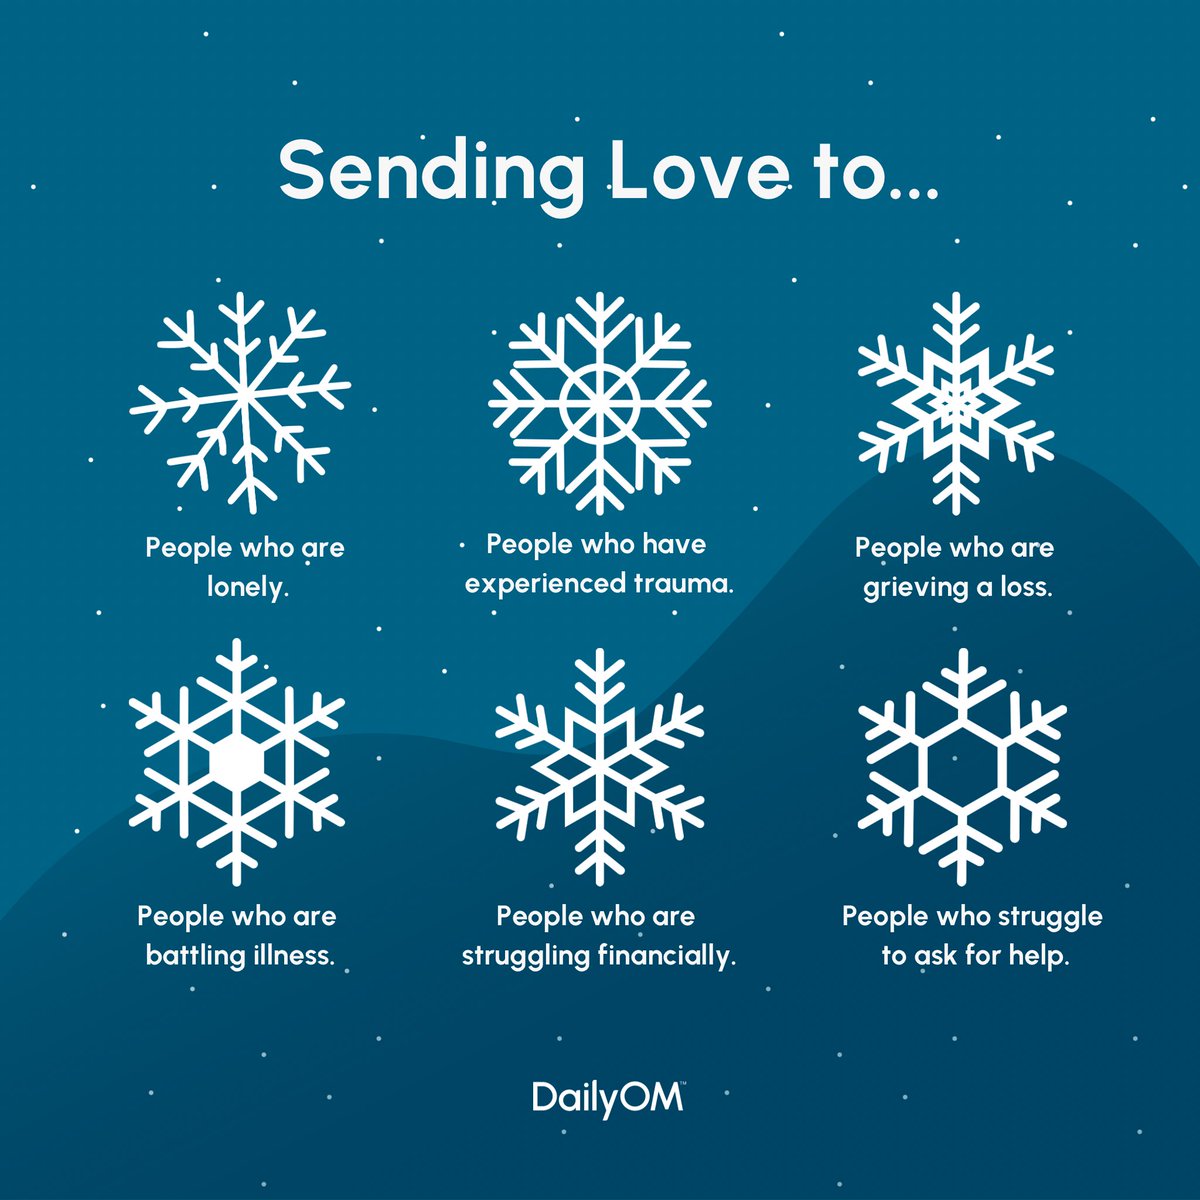 The holidays look and feel differently for everyone. ❄️ We're sending extra love to those who are experiencing hardship this season and a friendly reminder to check in on the people around you. #ChristmasEve